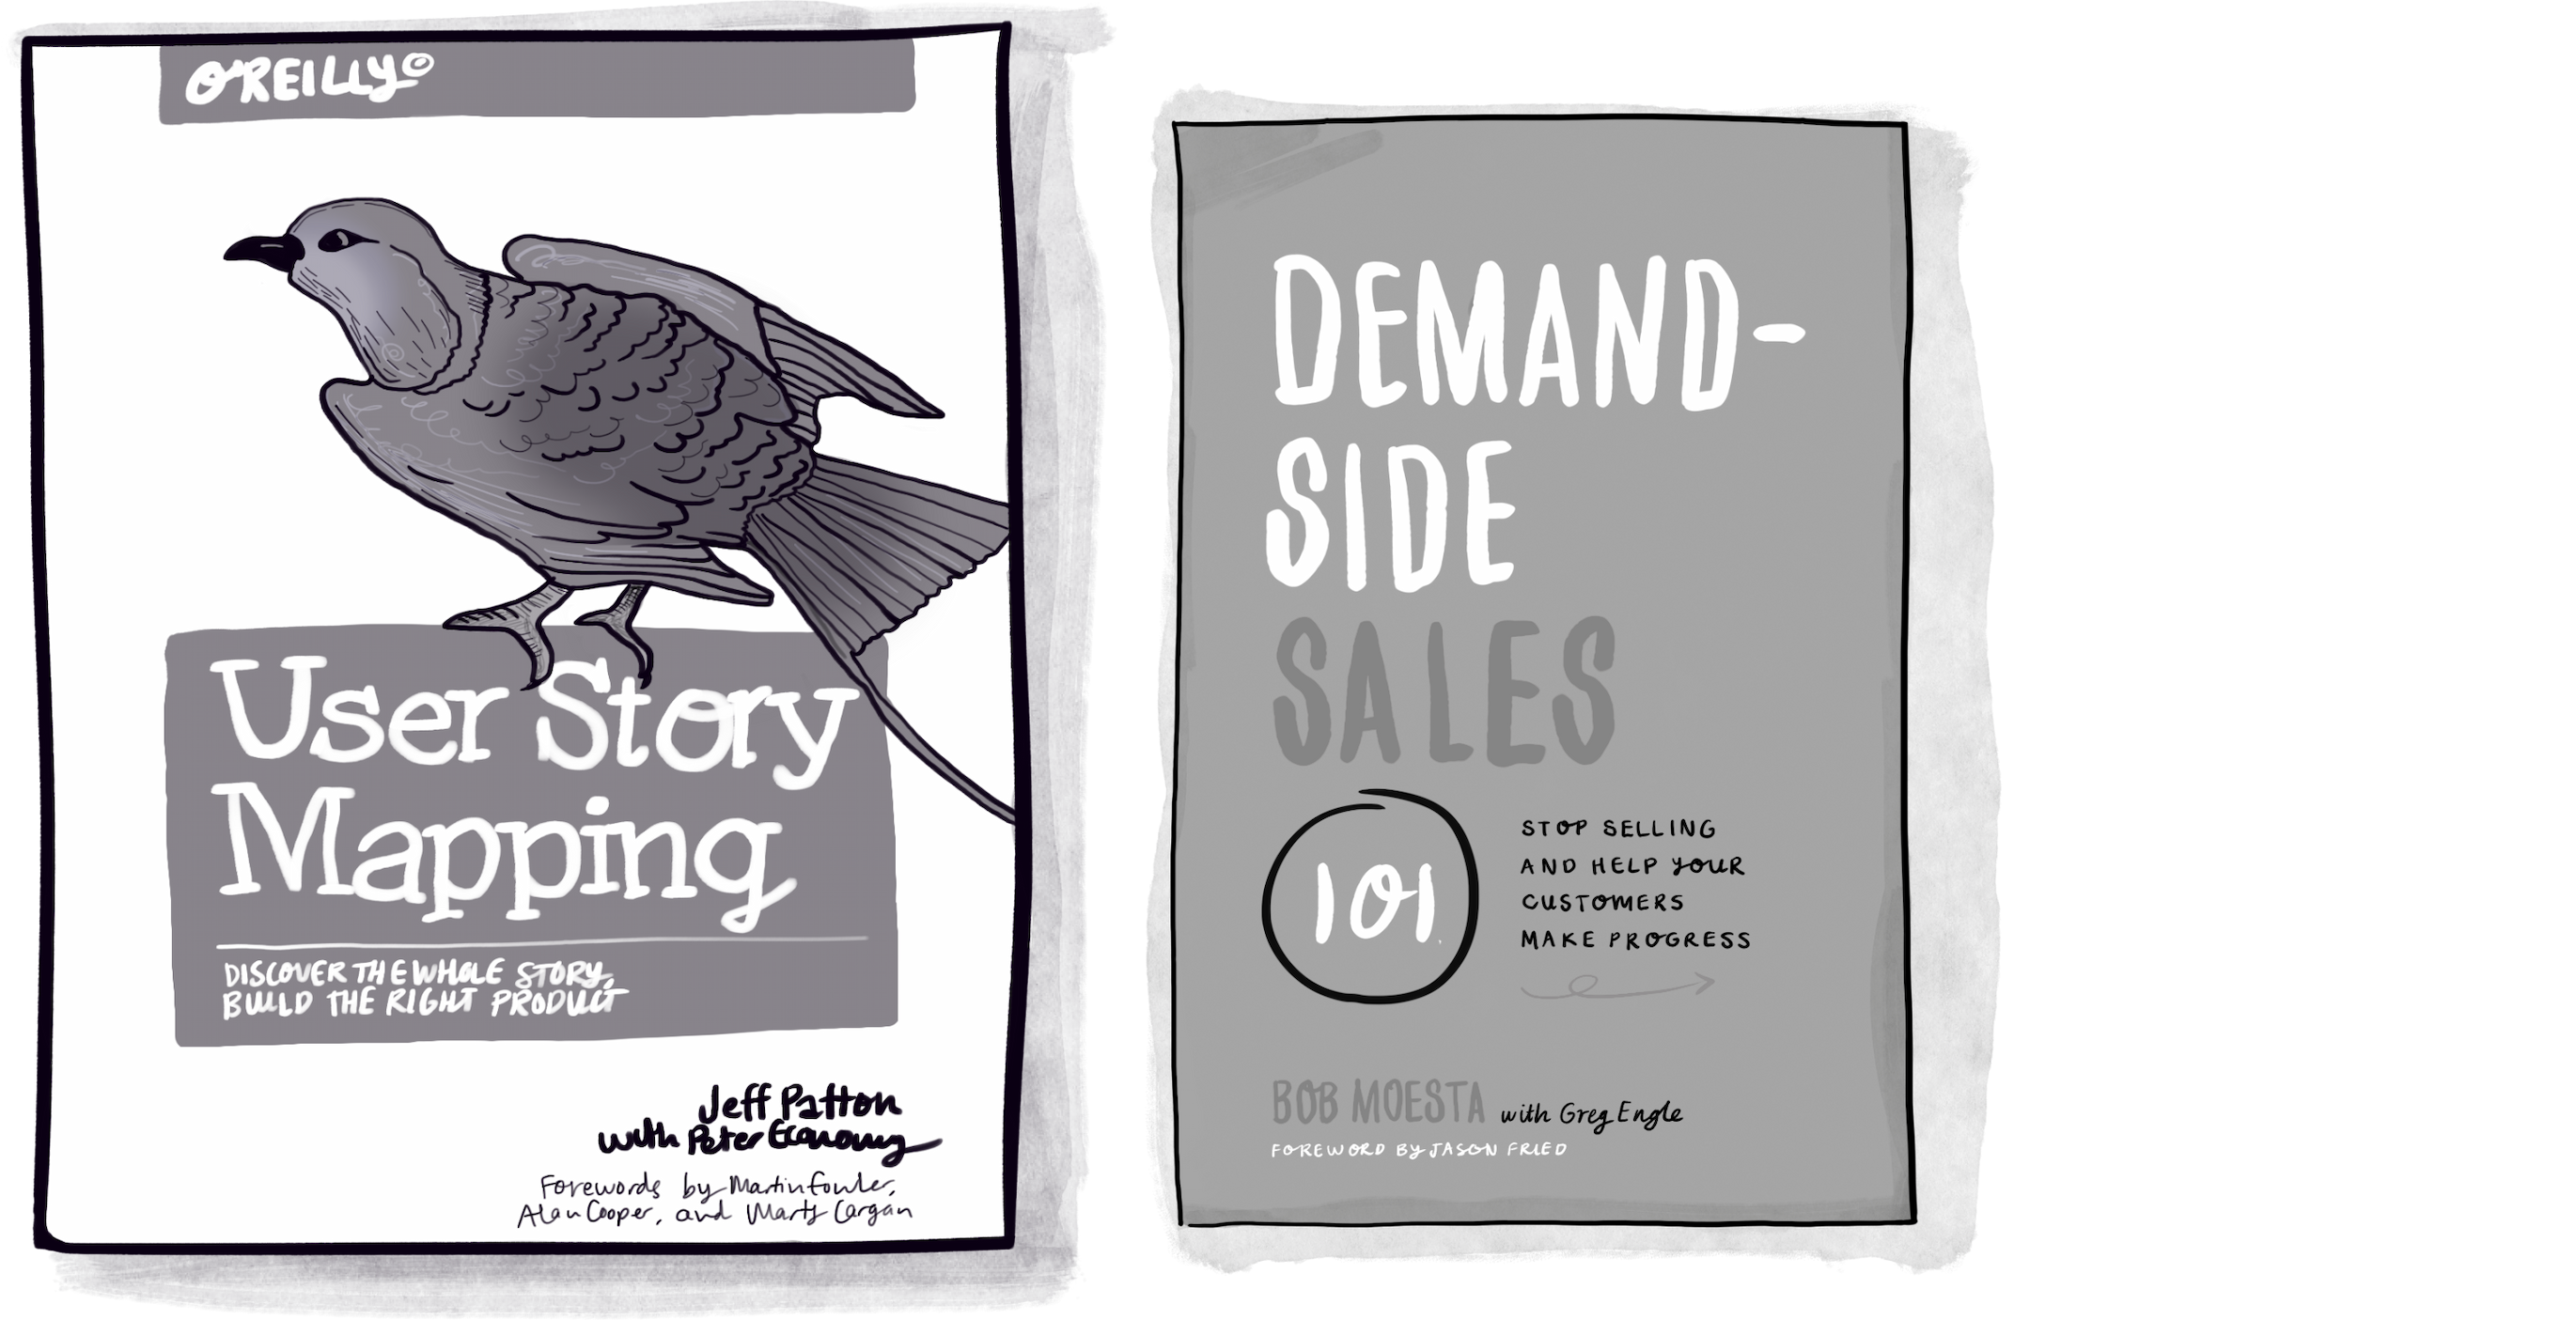 Product books for the Jimmy book list including User story mapping by Jeff Patton, and 
Demand side sales by Bob Moesta